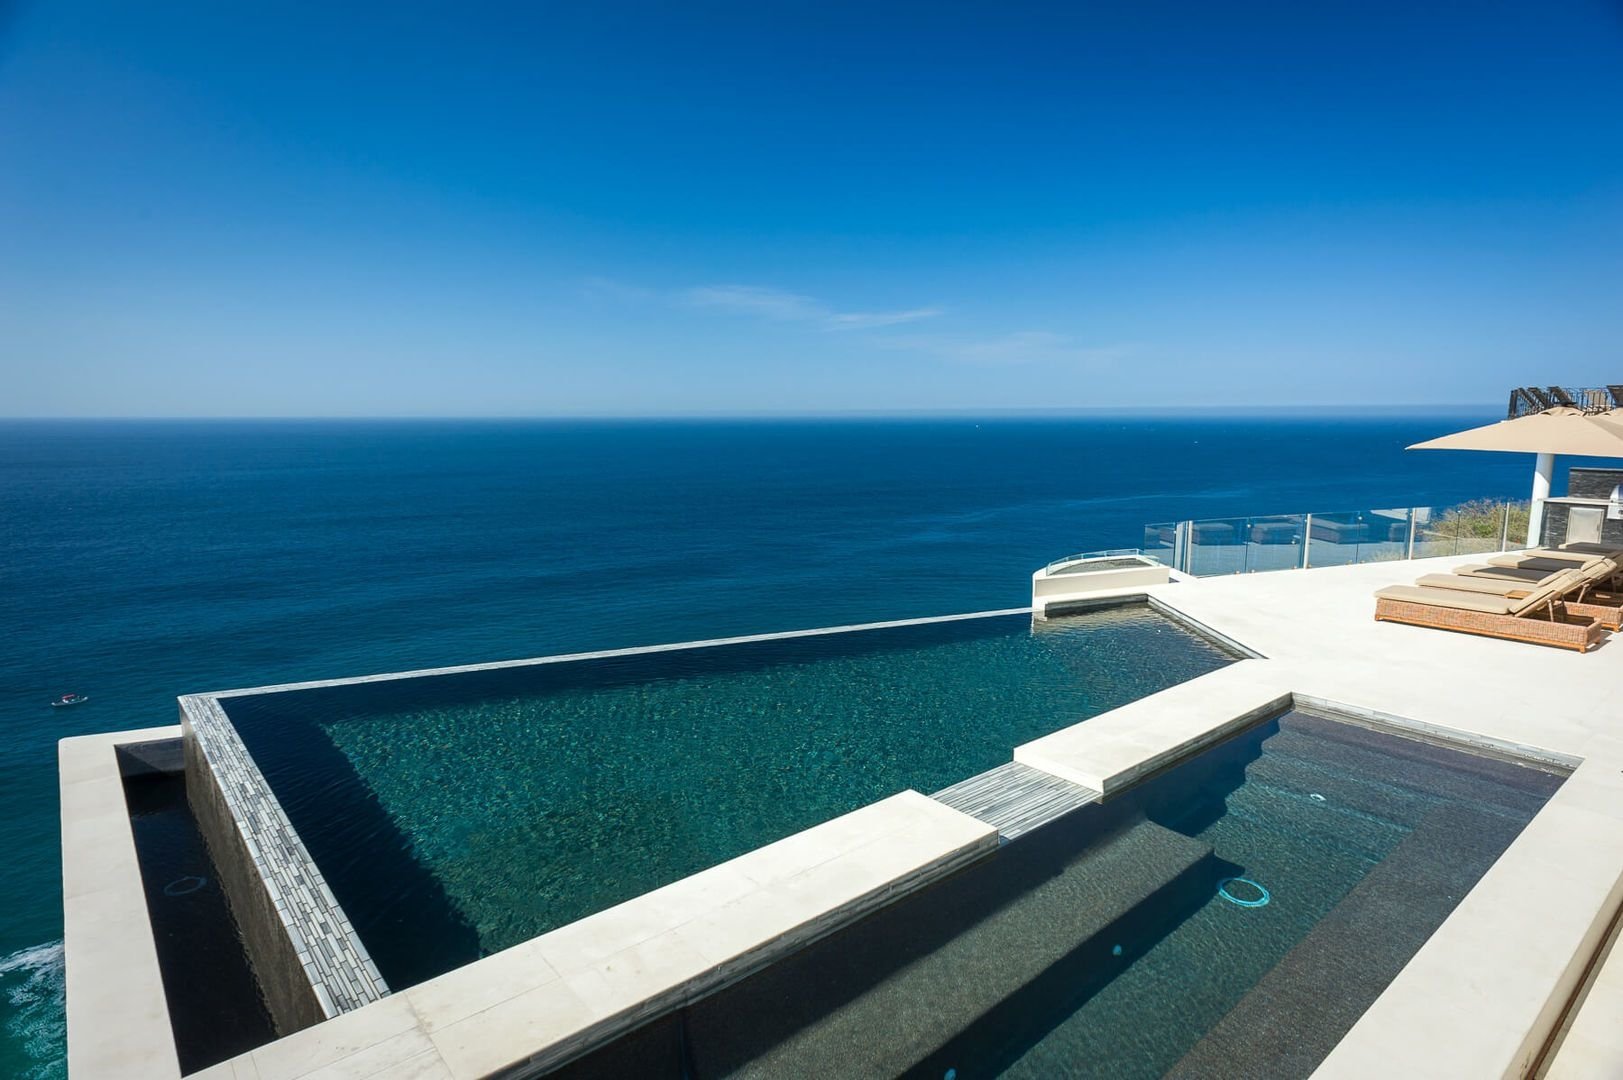 JACUZZI AND INFINITY POOL FACING THE OCEAN